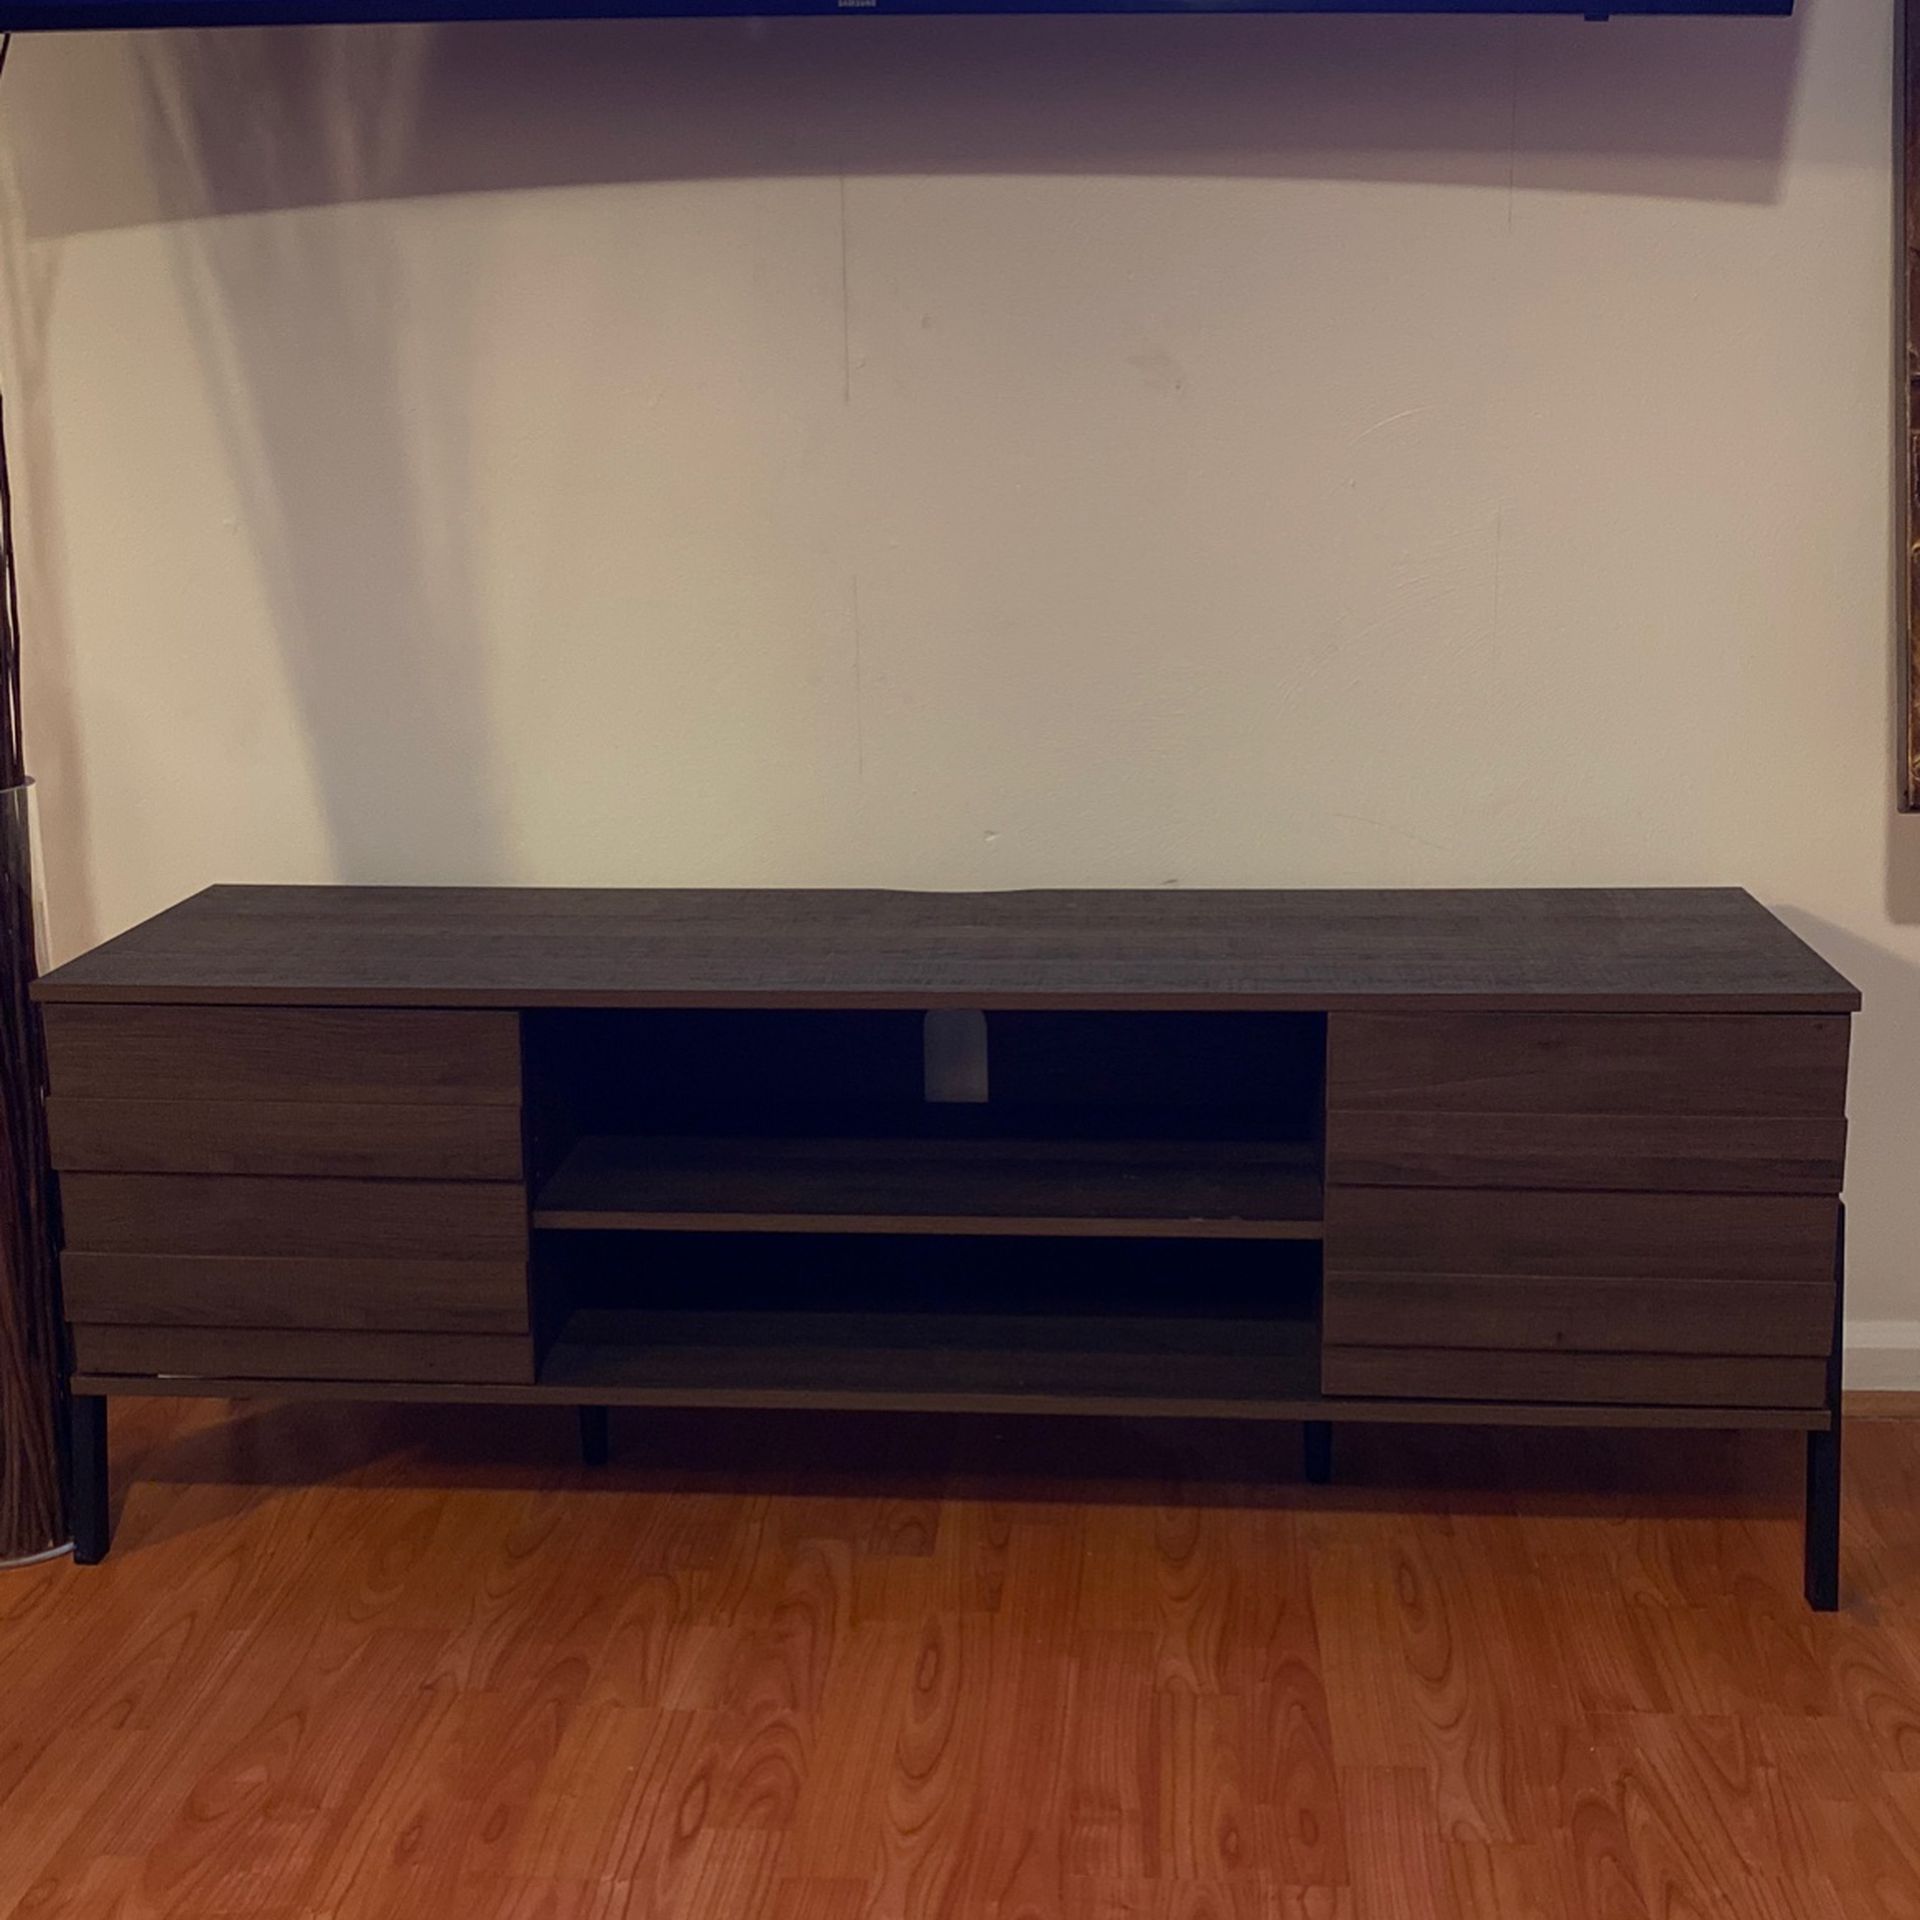 Brand New Rustic TV Stand up To 65”... 57L x 21H x 16D